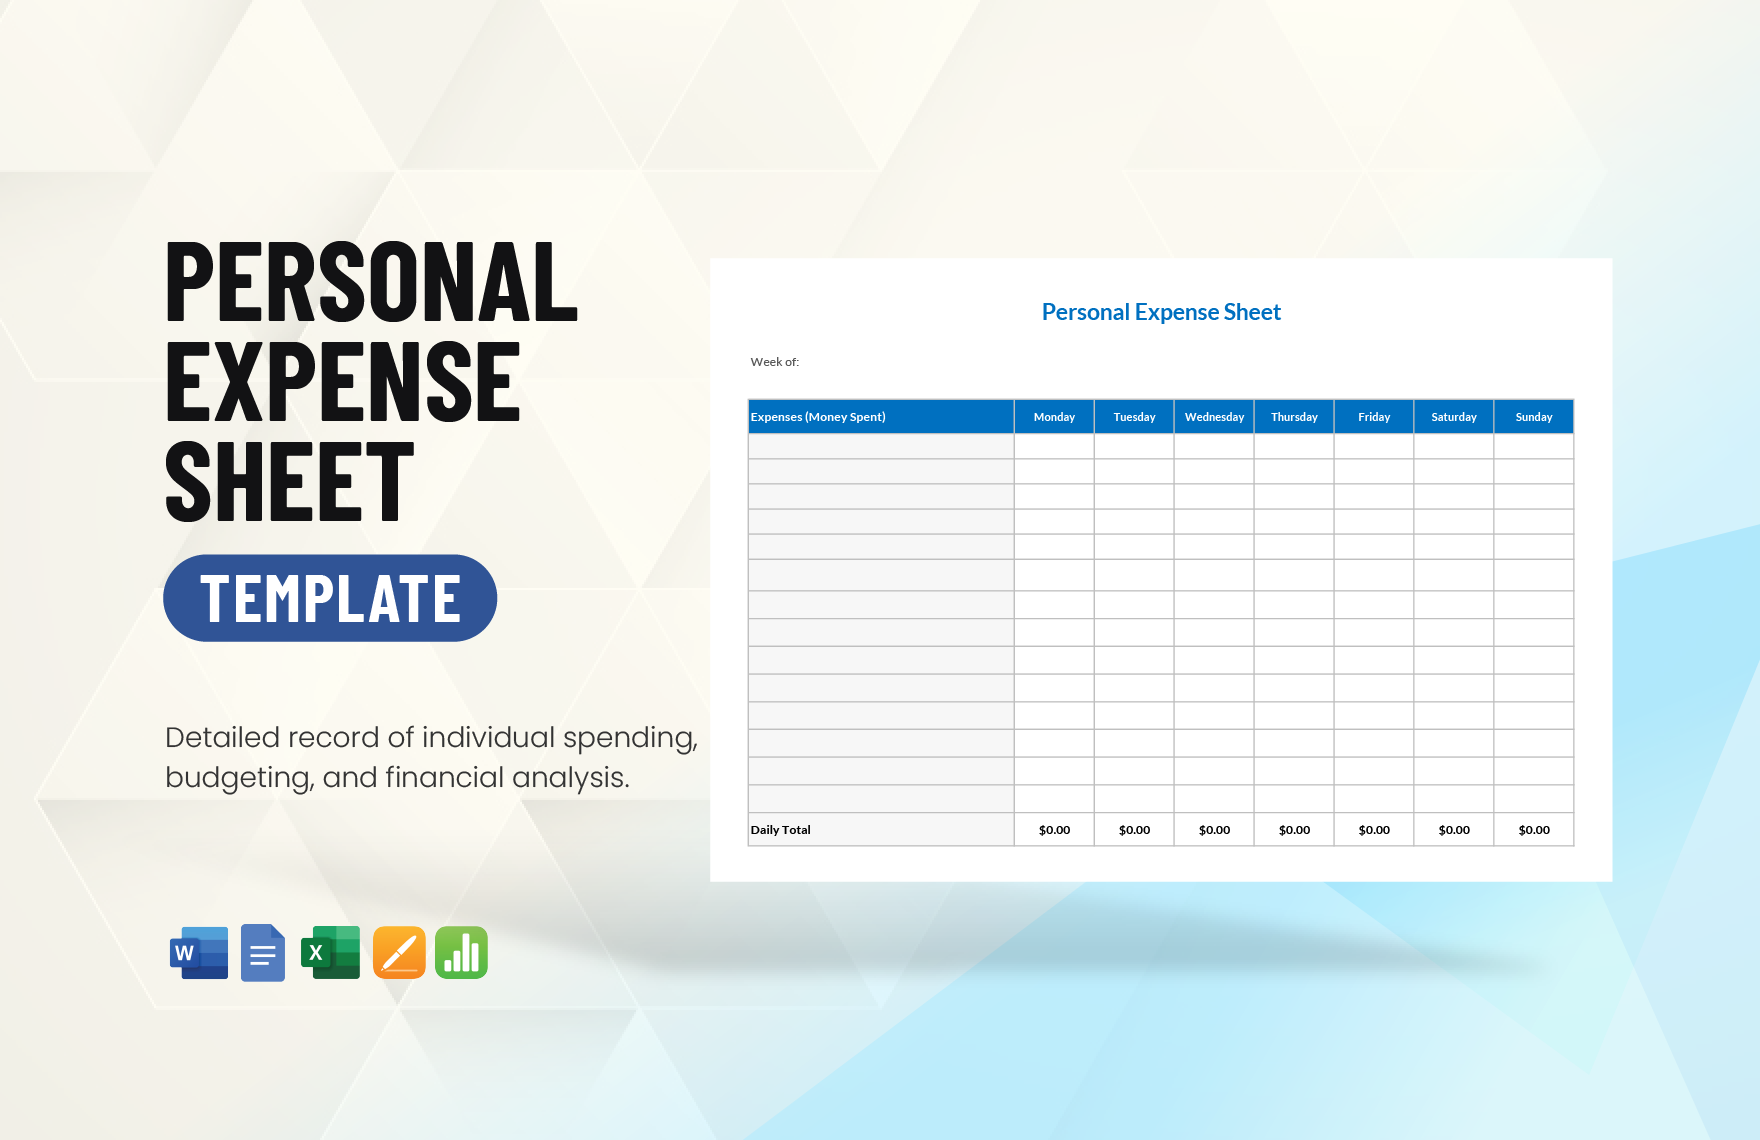 Personal Expense Sheet Template in Word, Google Docs, Excel, Apple Pages, Apple Numbers